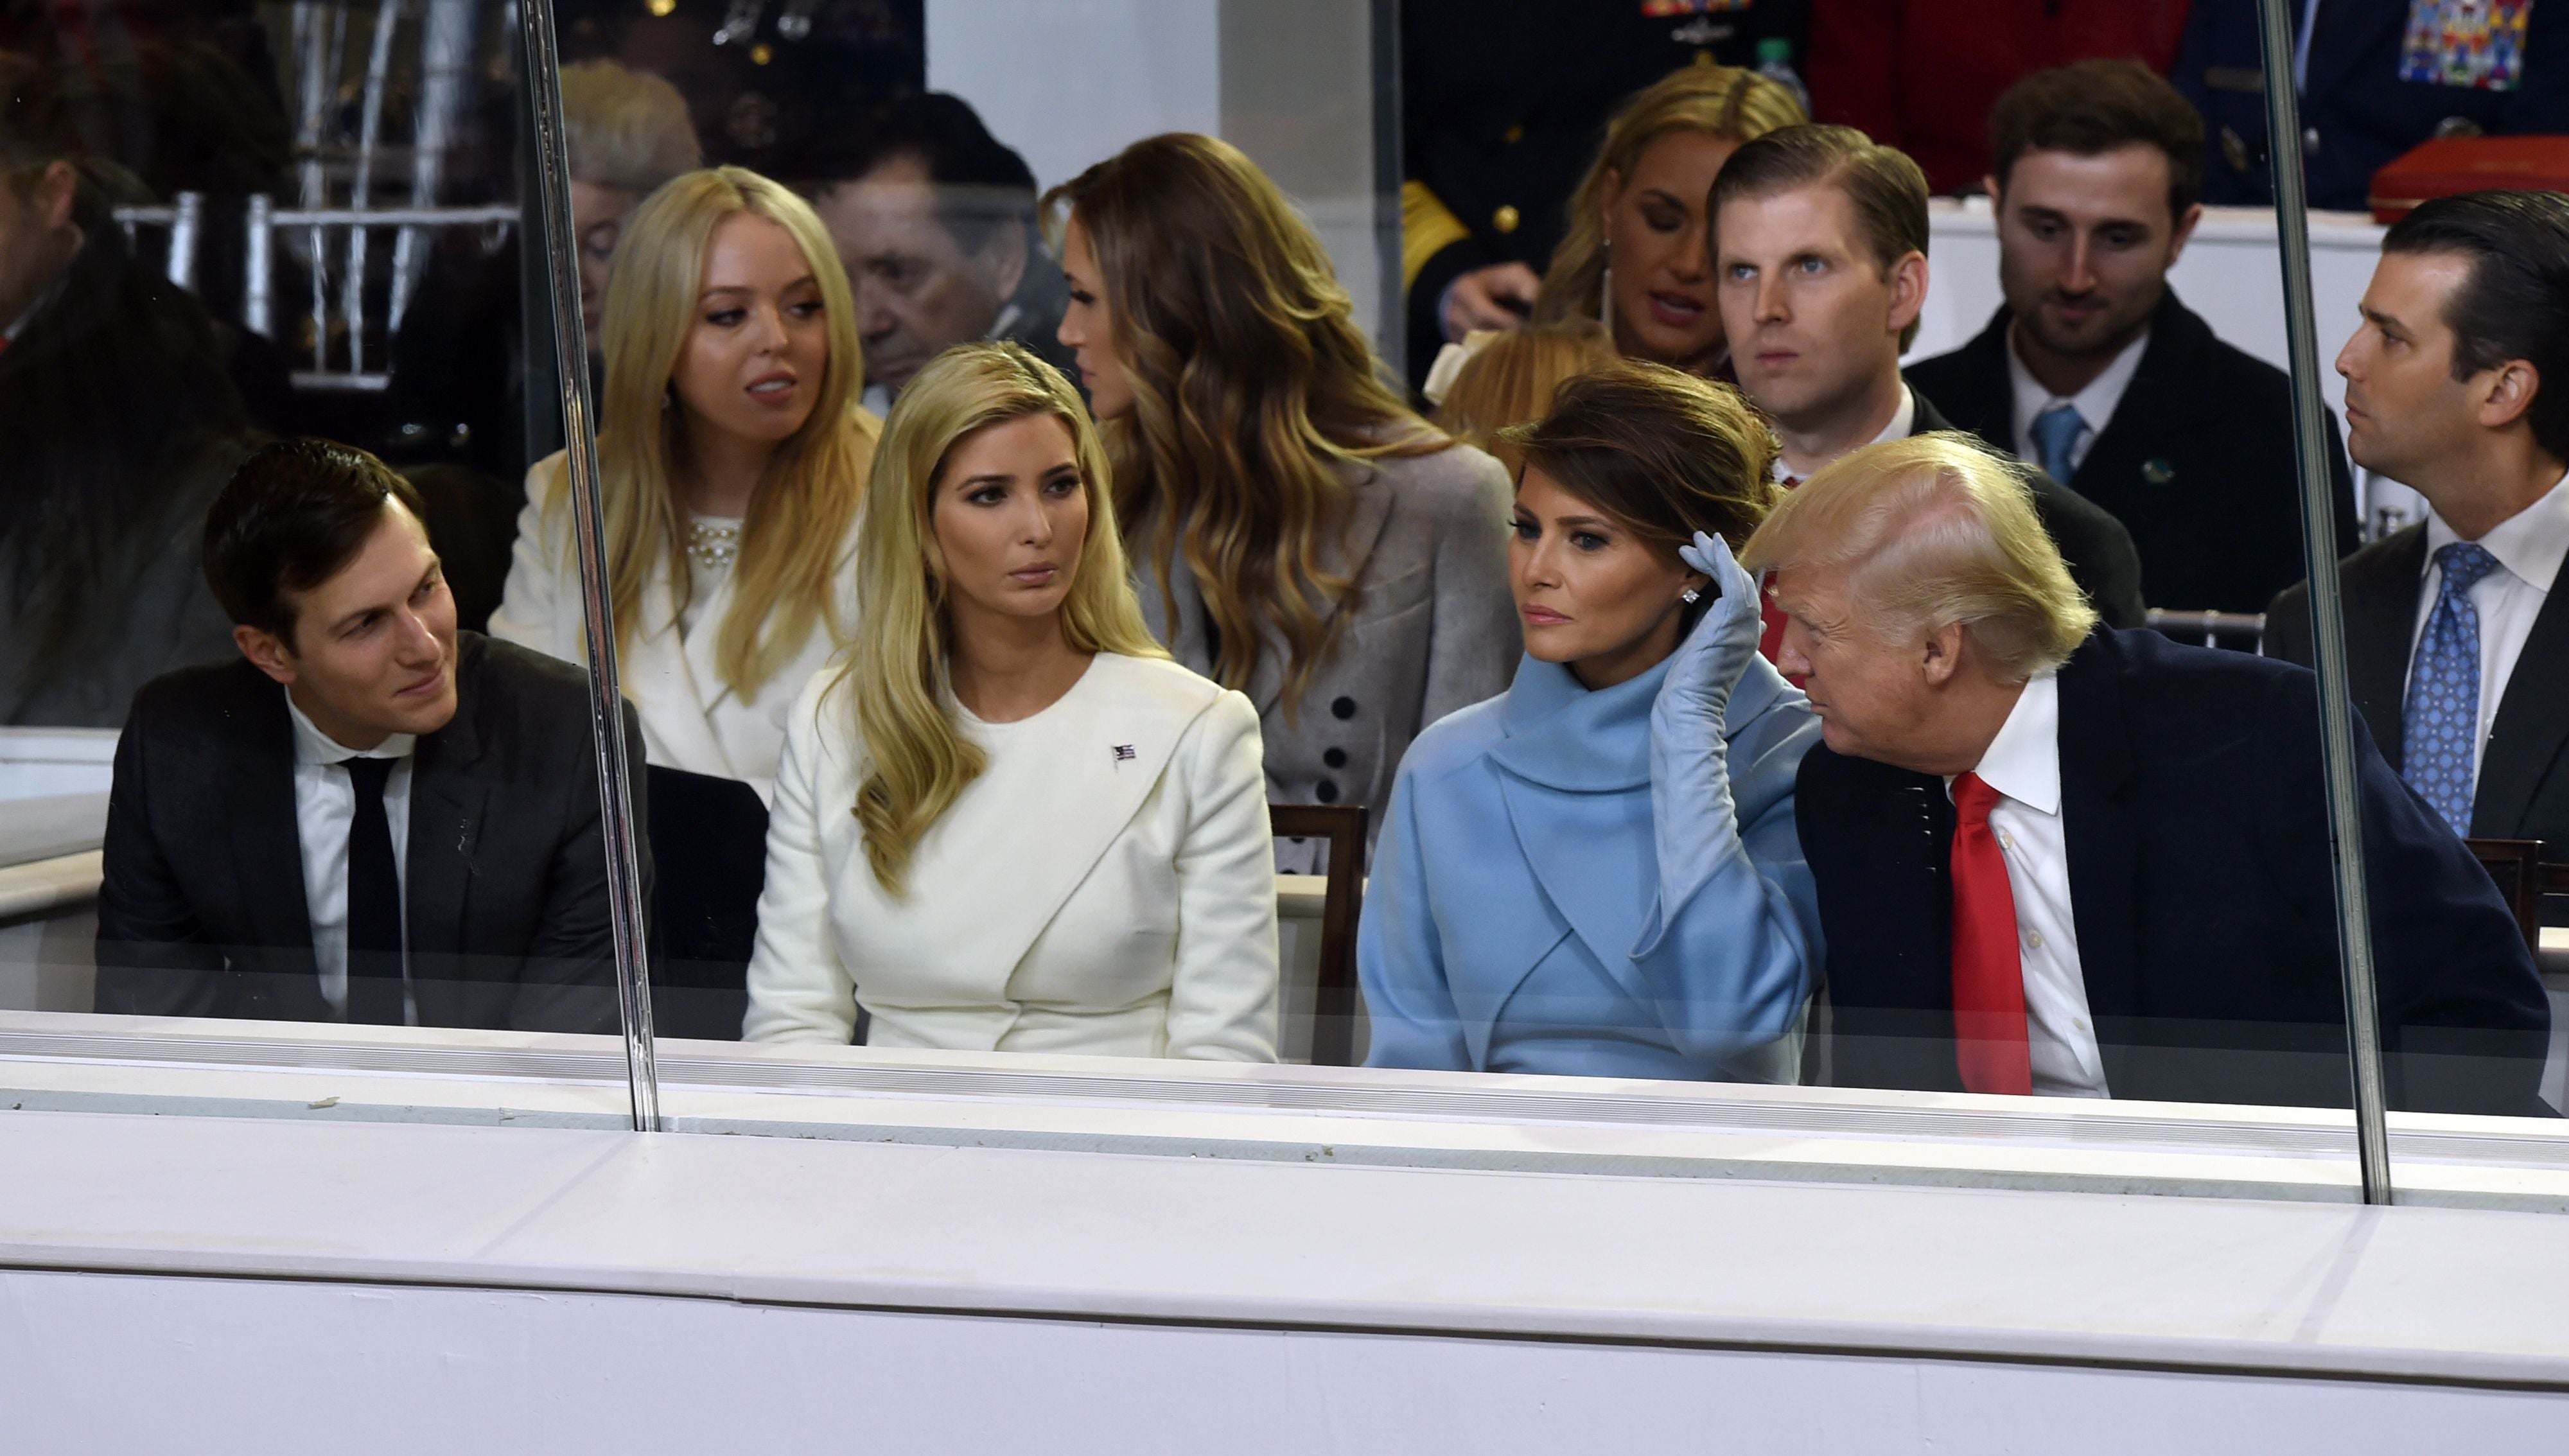 US President Donald Trump is joined by US First Lady Melania Trump (2nd R front), his daughter Ivanka Trump (2nd L front) and her husband Jared Kushner (L front) during the presidential inaugural parade on January 20, 2017 in Washington, DC